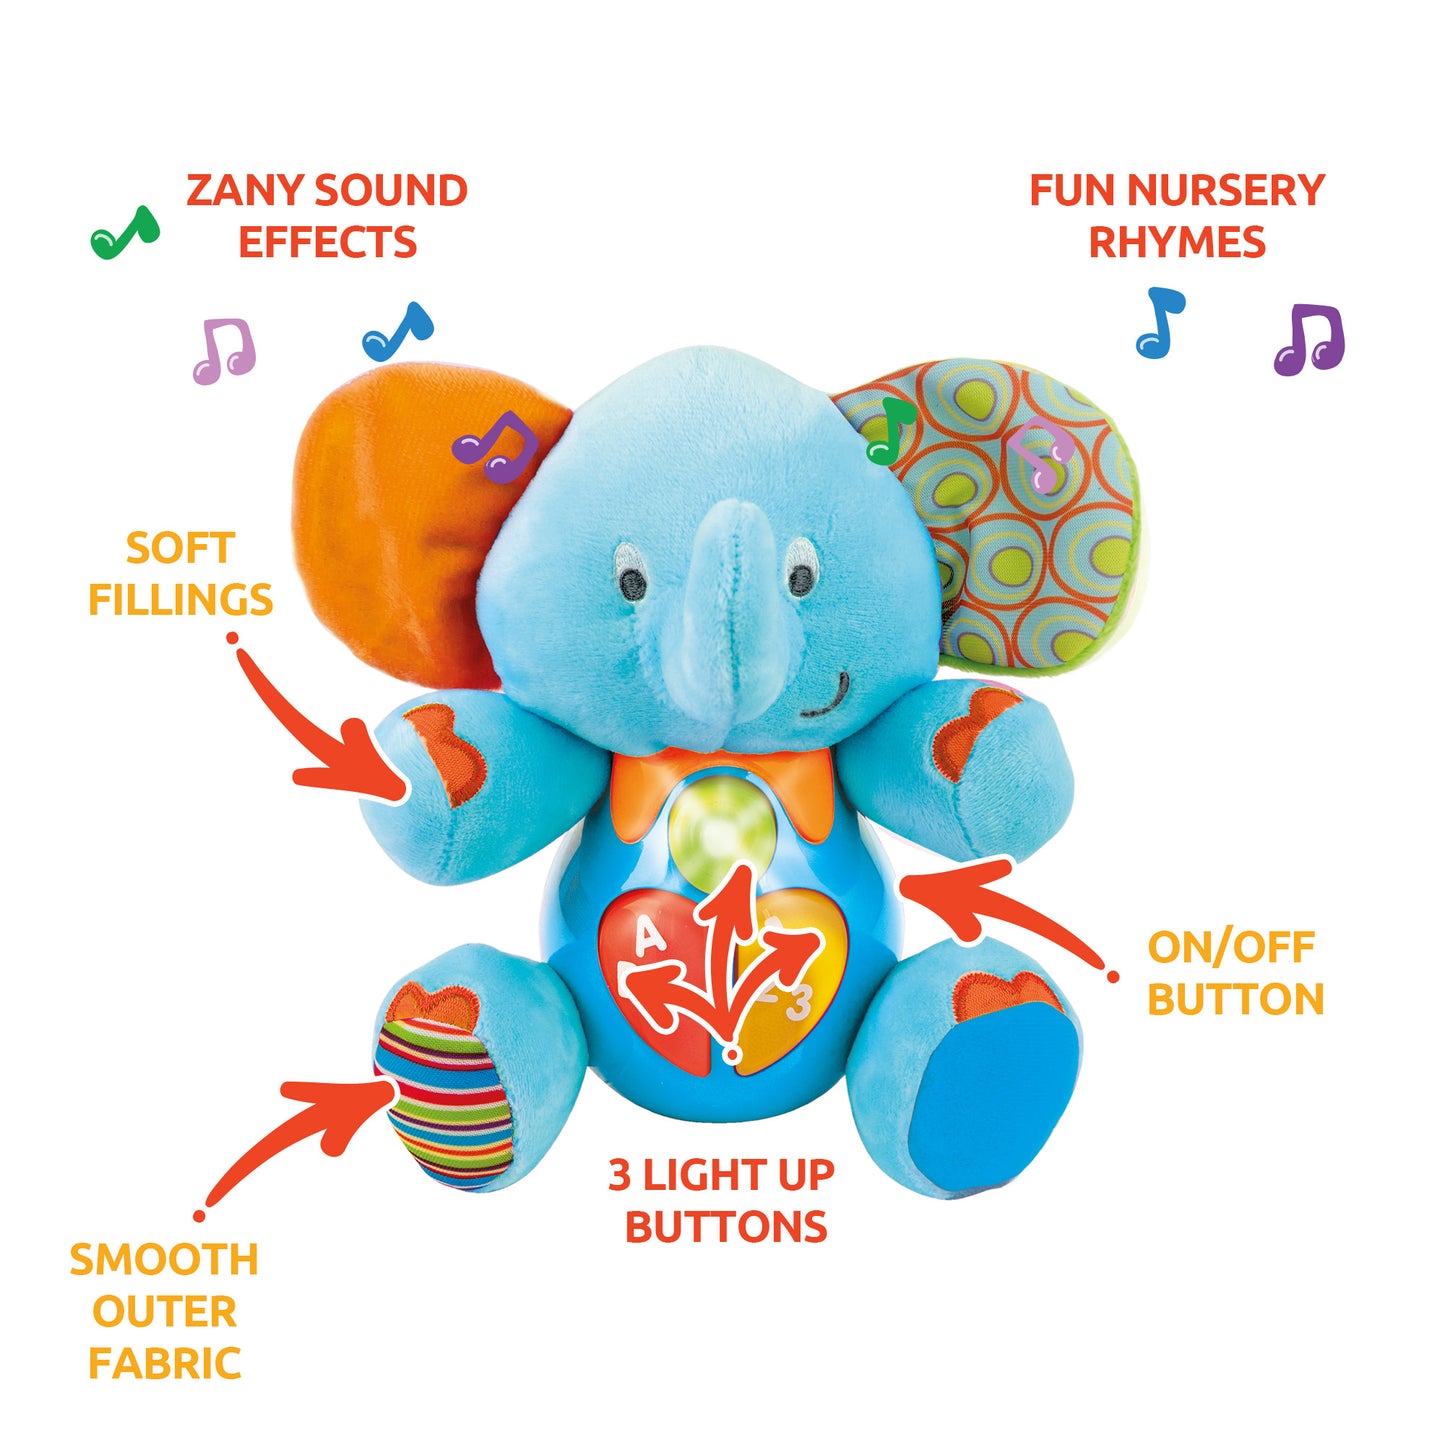 KiddoLab Plush Elephant Baby Toys - Musical Stuffed Animals with 3 Light-Up Buttons, 4 Children's Nursery Songs & Sound Effects - Soft Learning Toy for 3 Months & Olds Infants, Babies & Toddlers